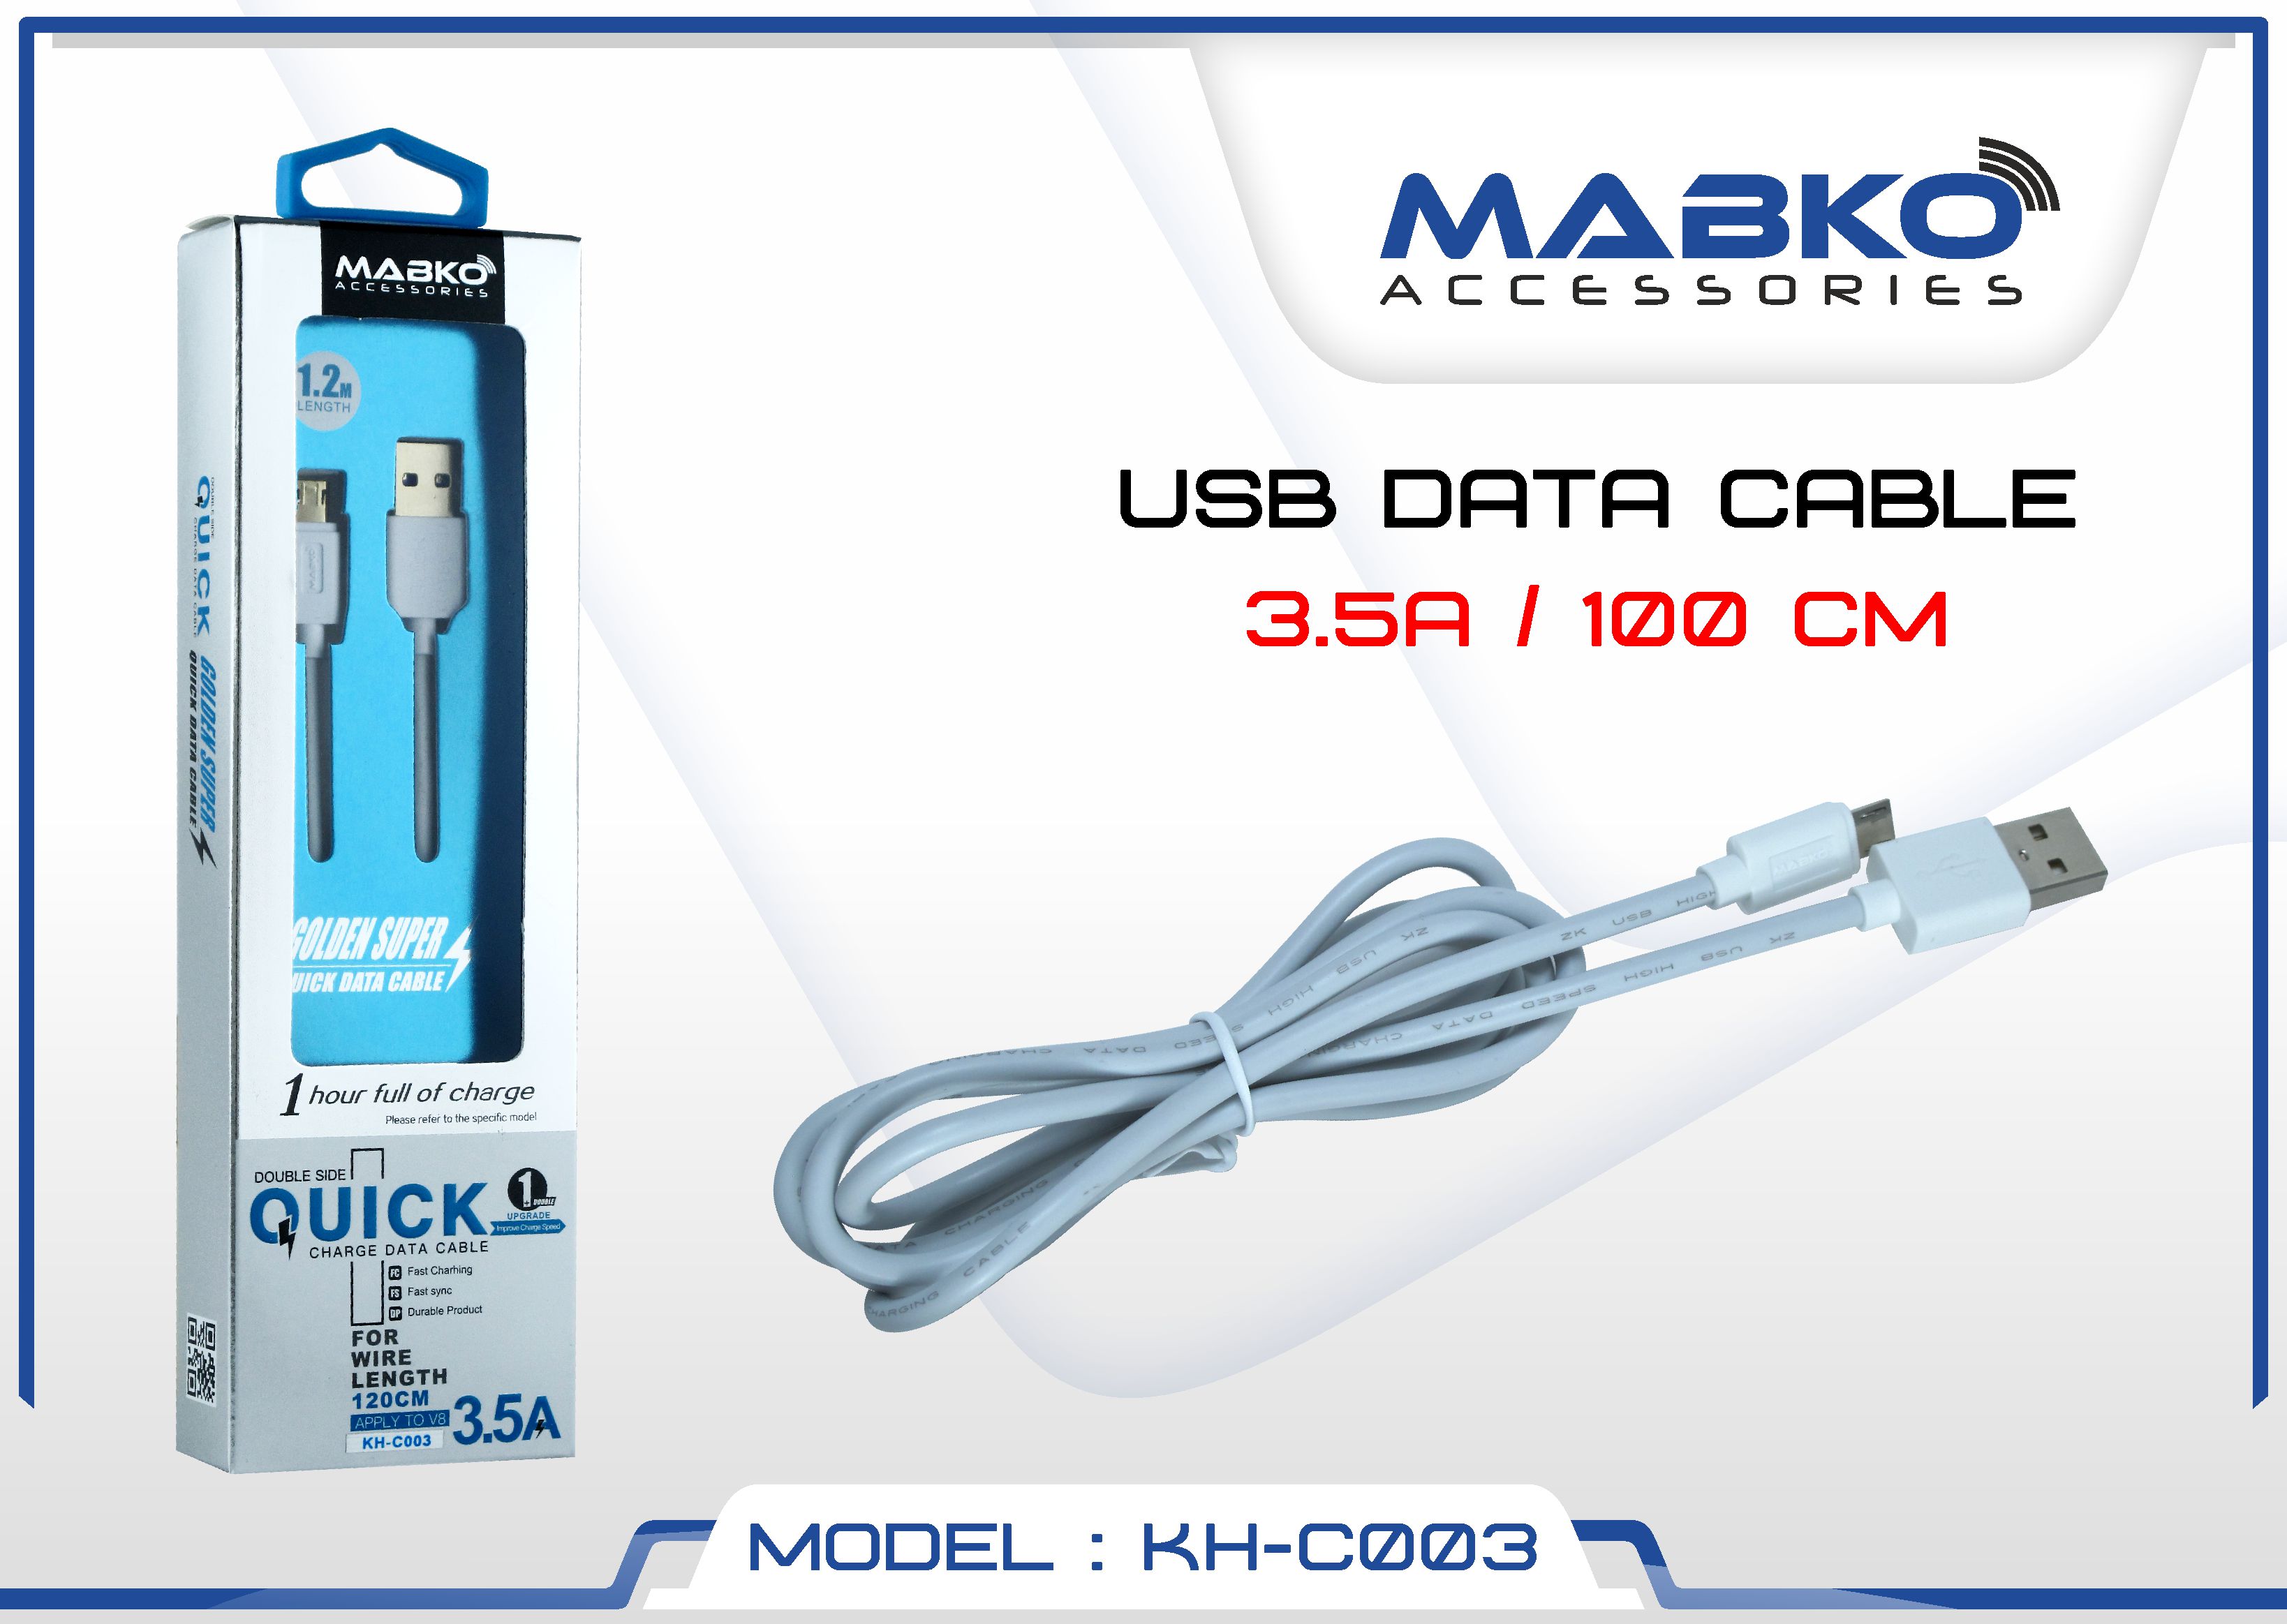 SMART METAL CABLE H-31091